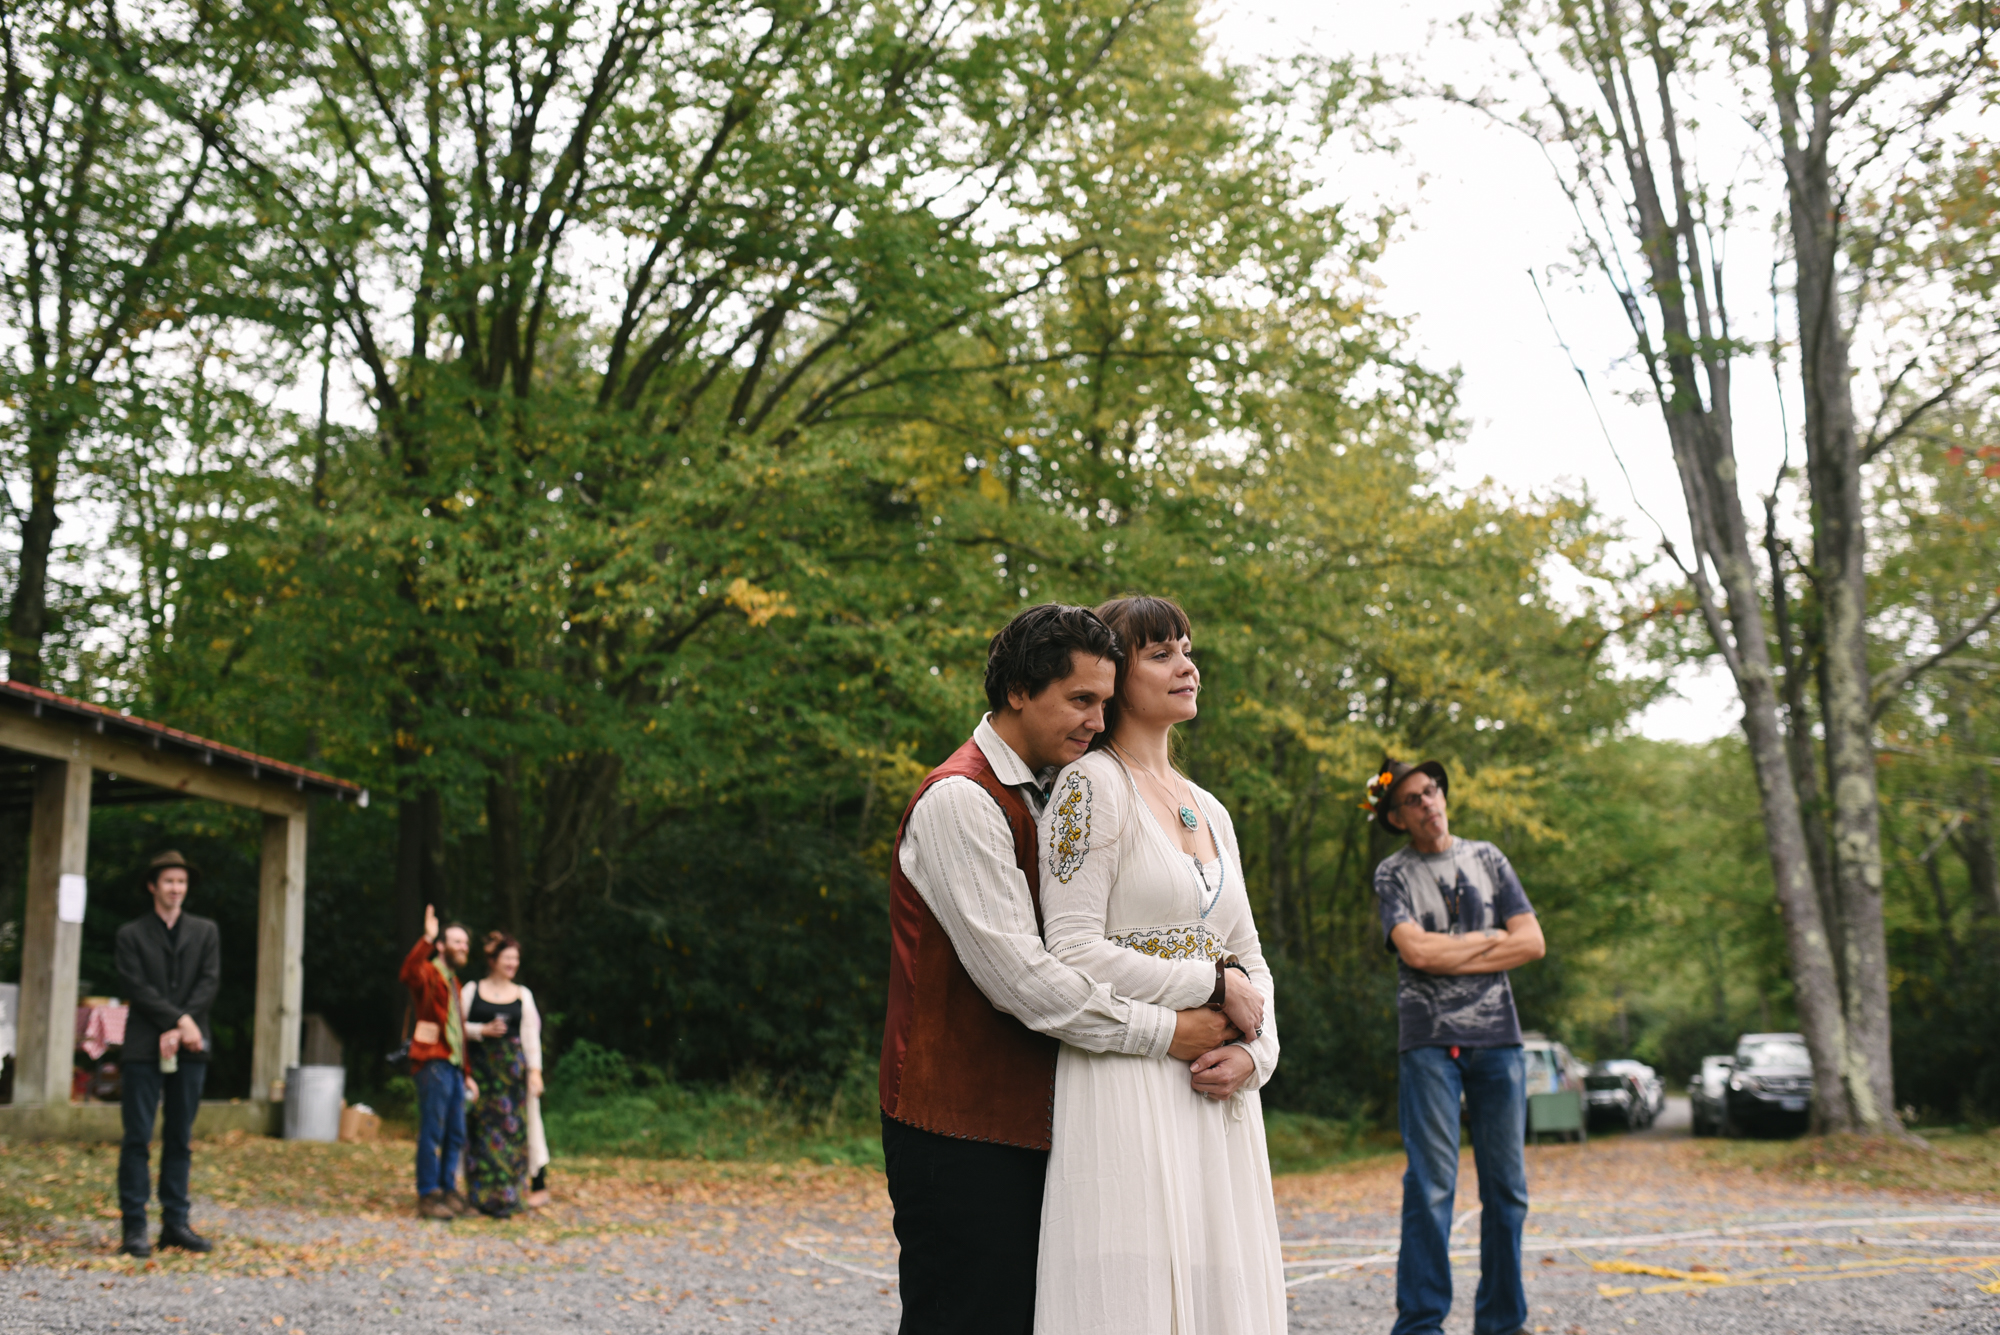  Mountain Wedding, Outdoors, Rustic, West Virginia, Maryland Wedding Photographer, DIY, Casual, groom holding bride from behind while watching musician 